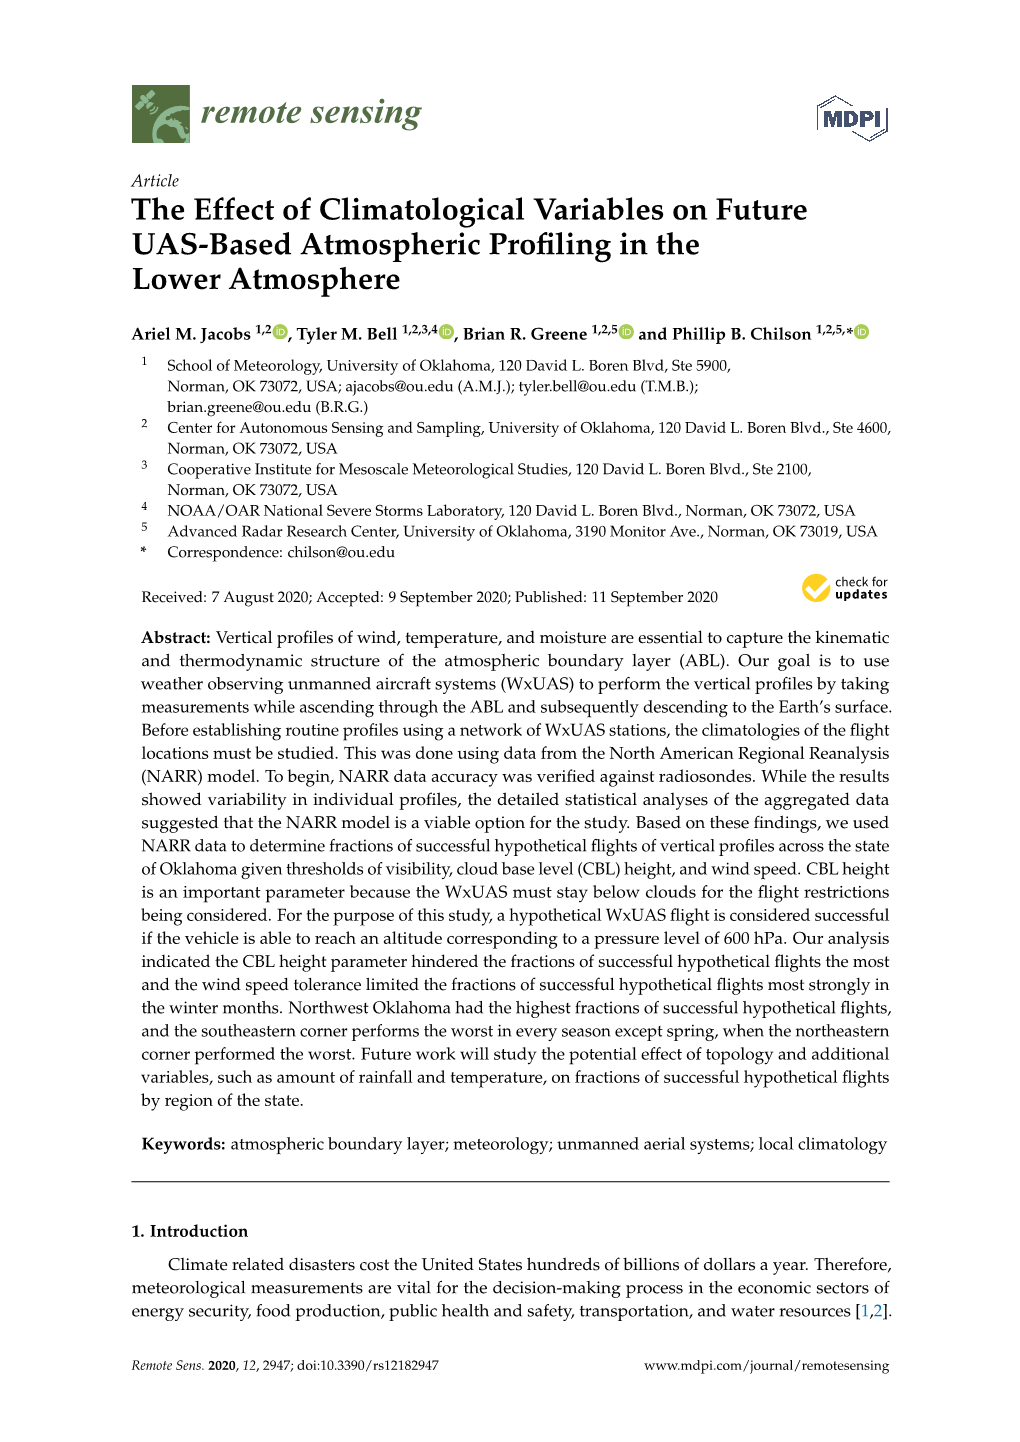 The Effect of Climatological Variables on Future UAS-Based Atmospheric Profiling in the Lower Atmosphere